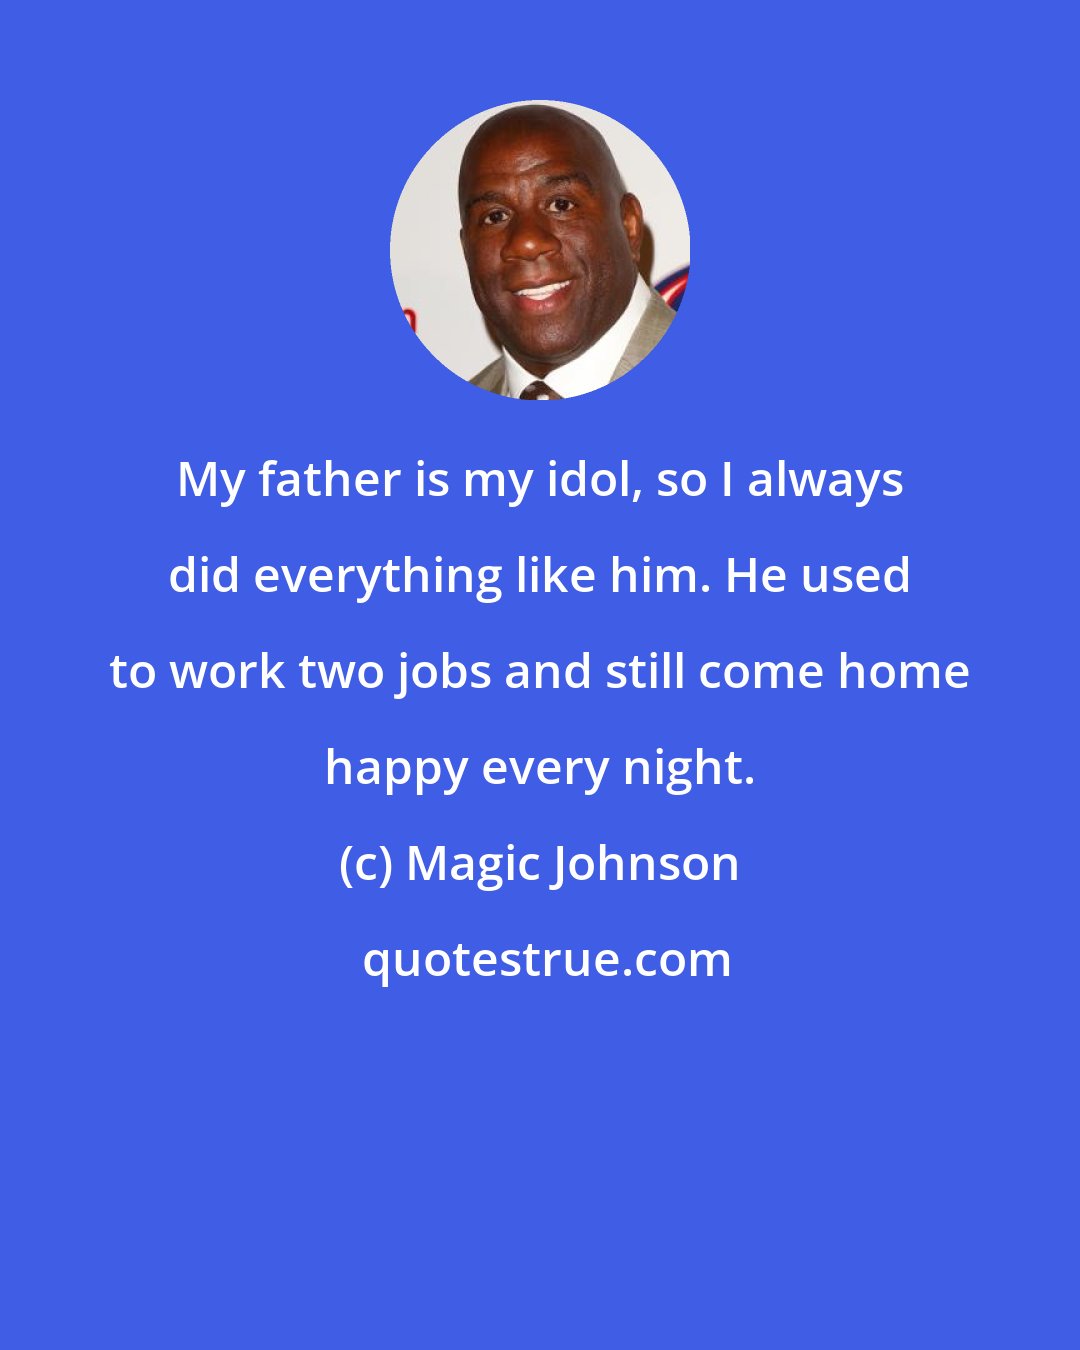 Magic Johnson: My father is my idol, so I always did everything like him. He used to work two jobs and still come home happy every night.